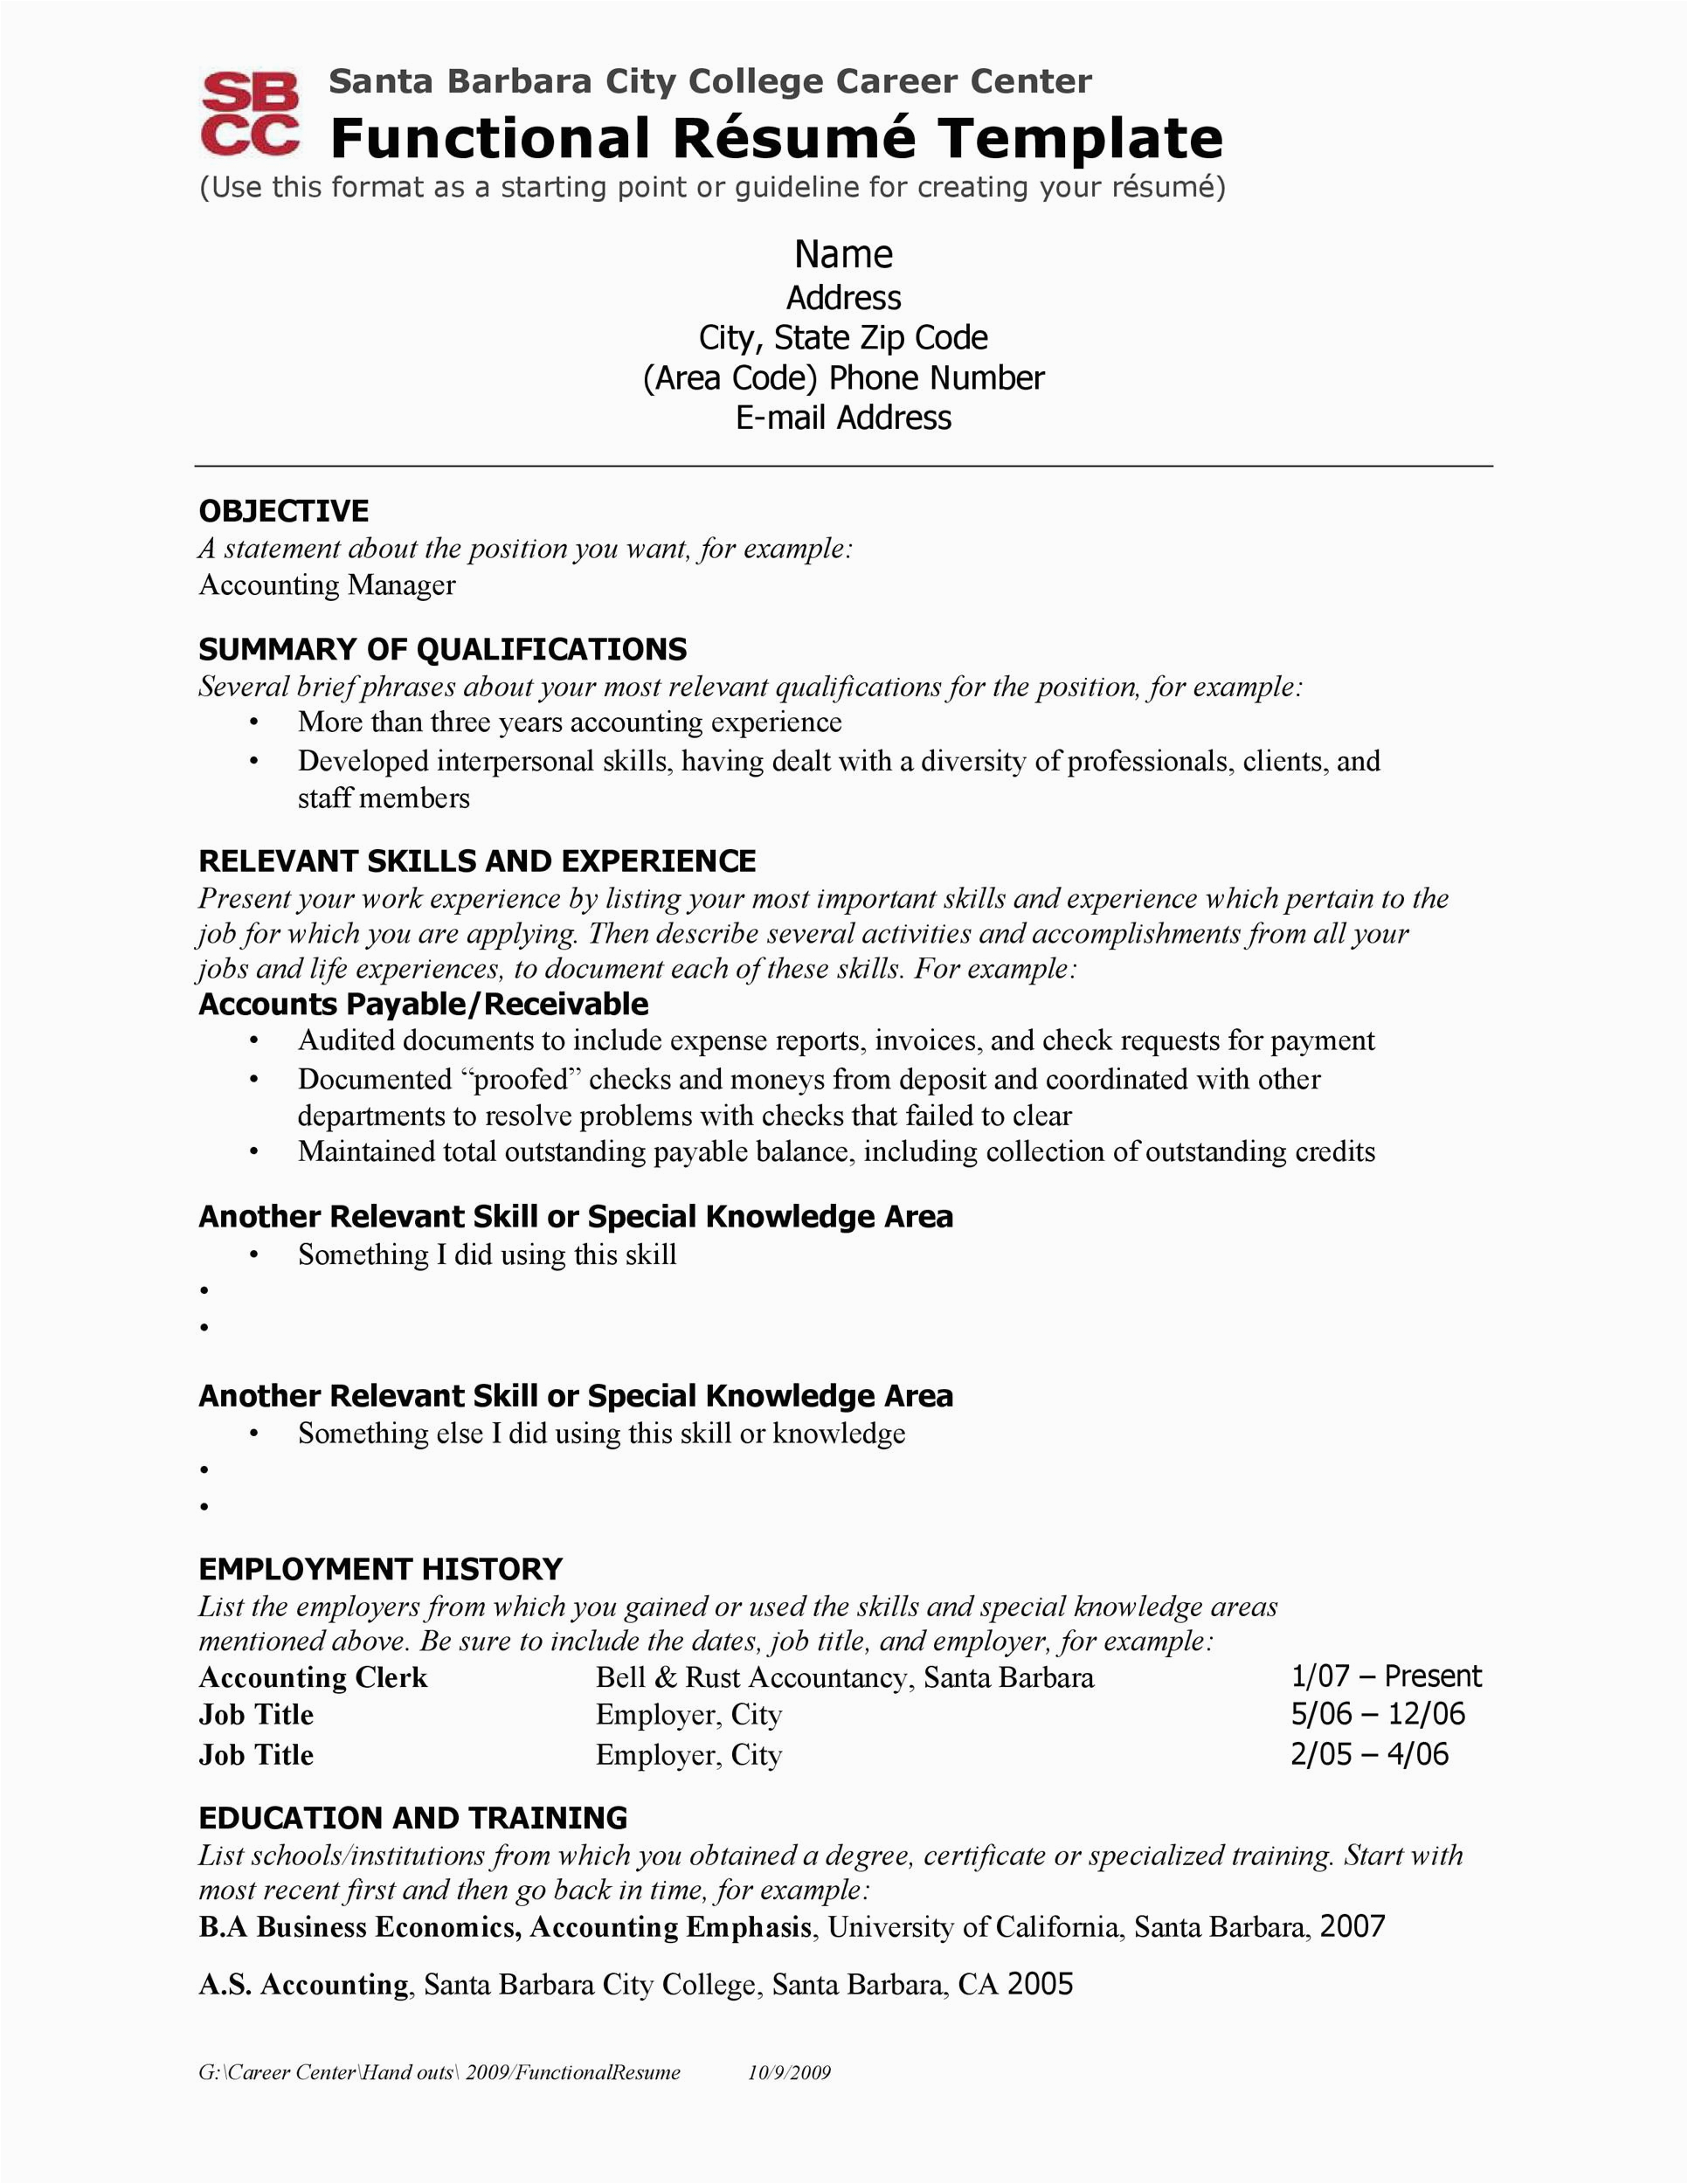 Functional Resume Template for College Student Functional Resume Template for Colege Student